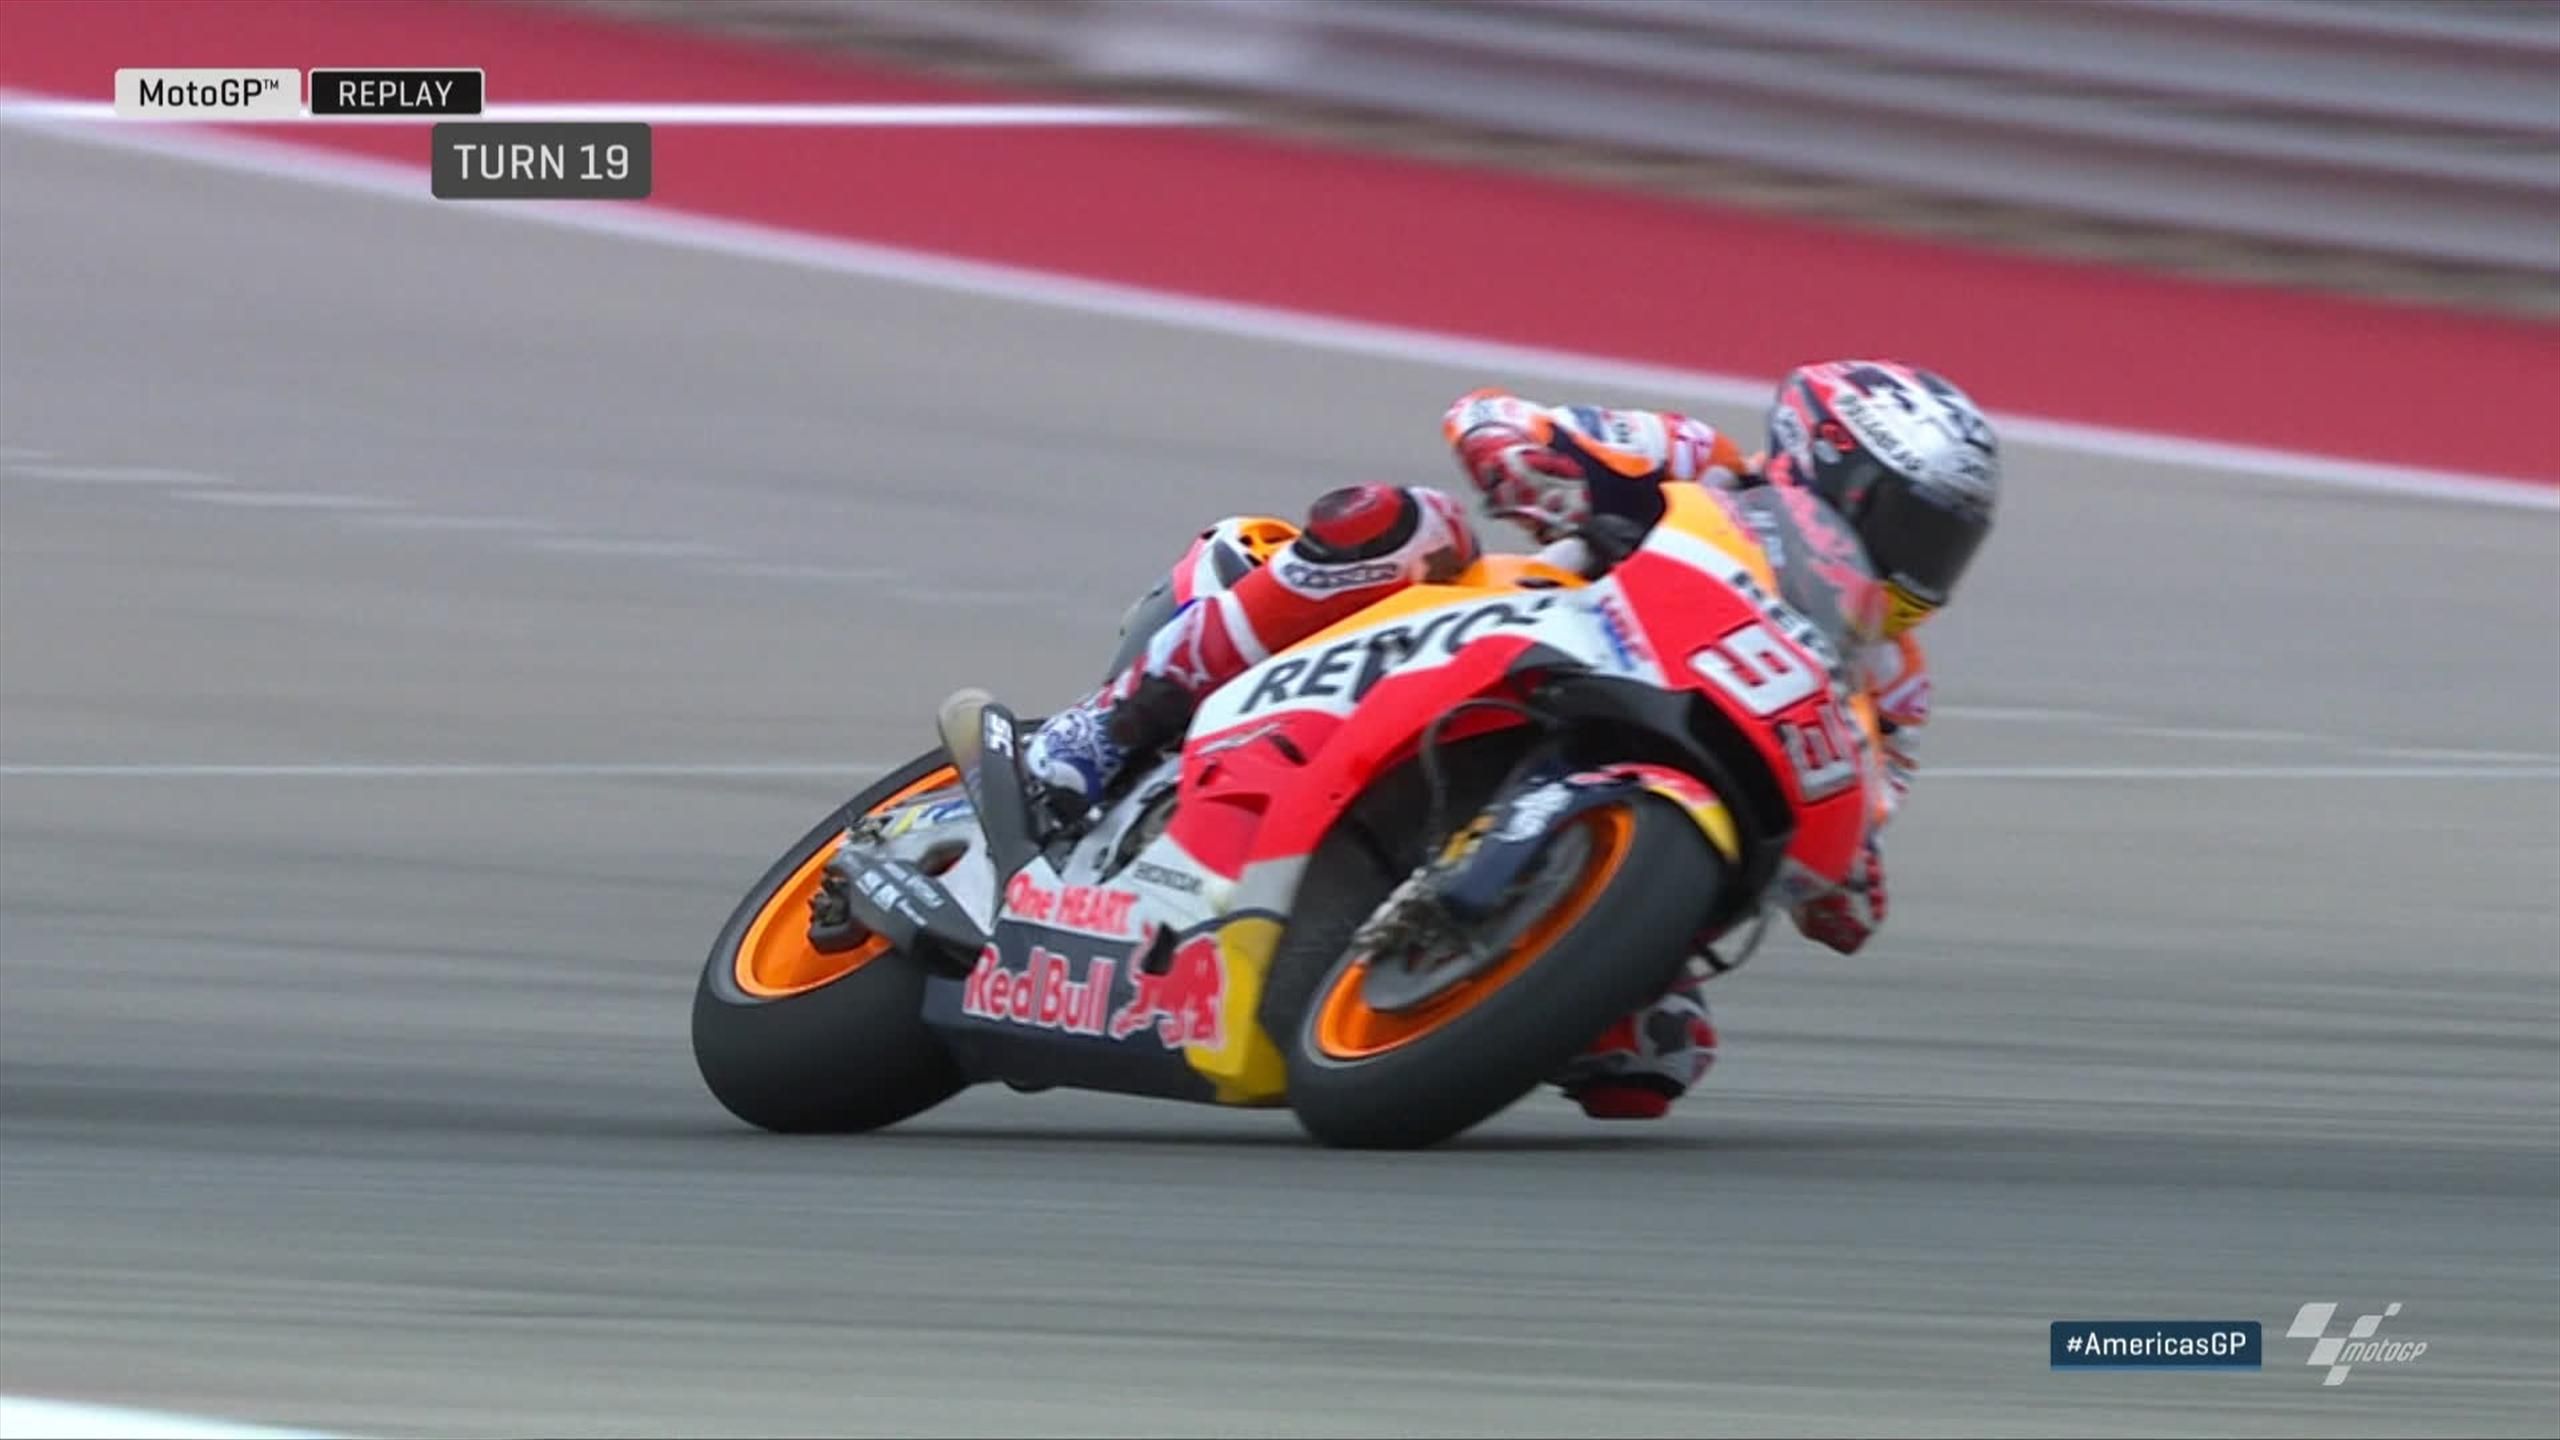 Marc Marquez tops first practice ahead of Valentino Rossi